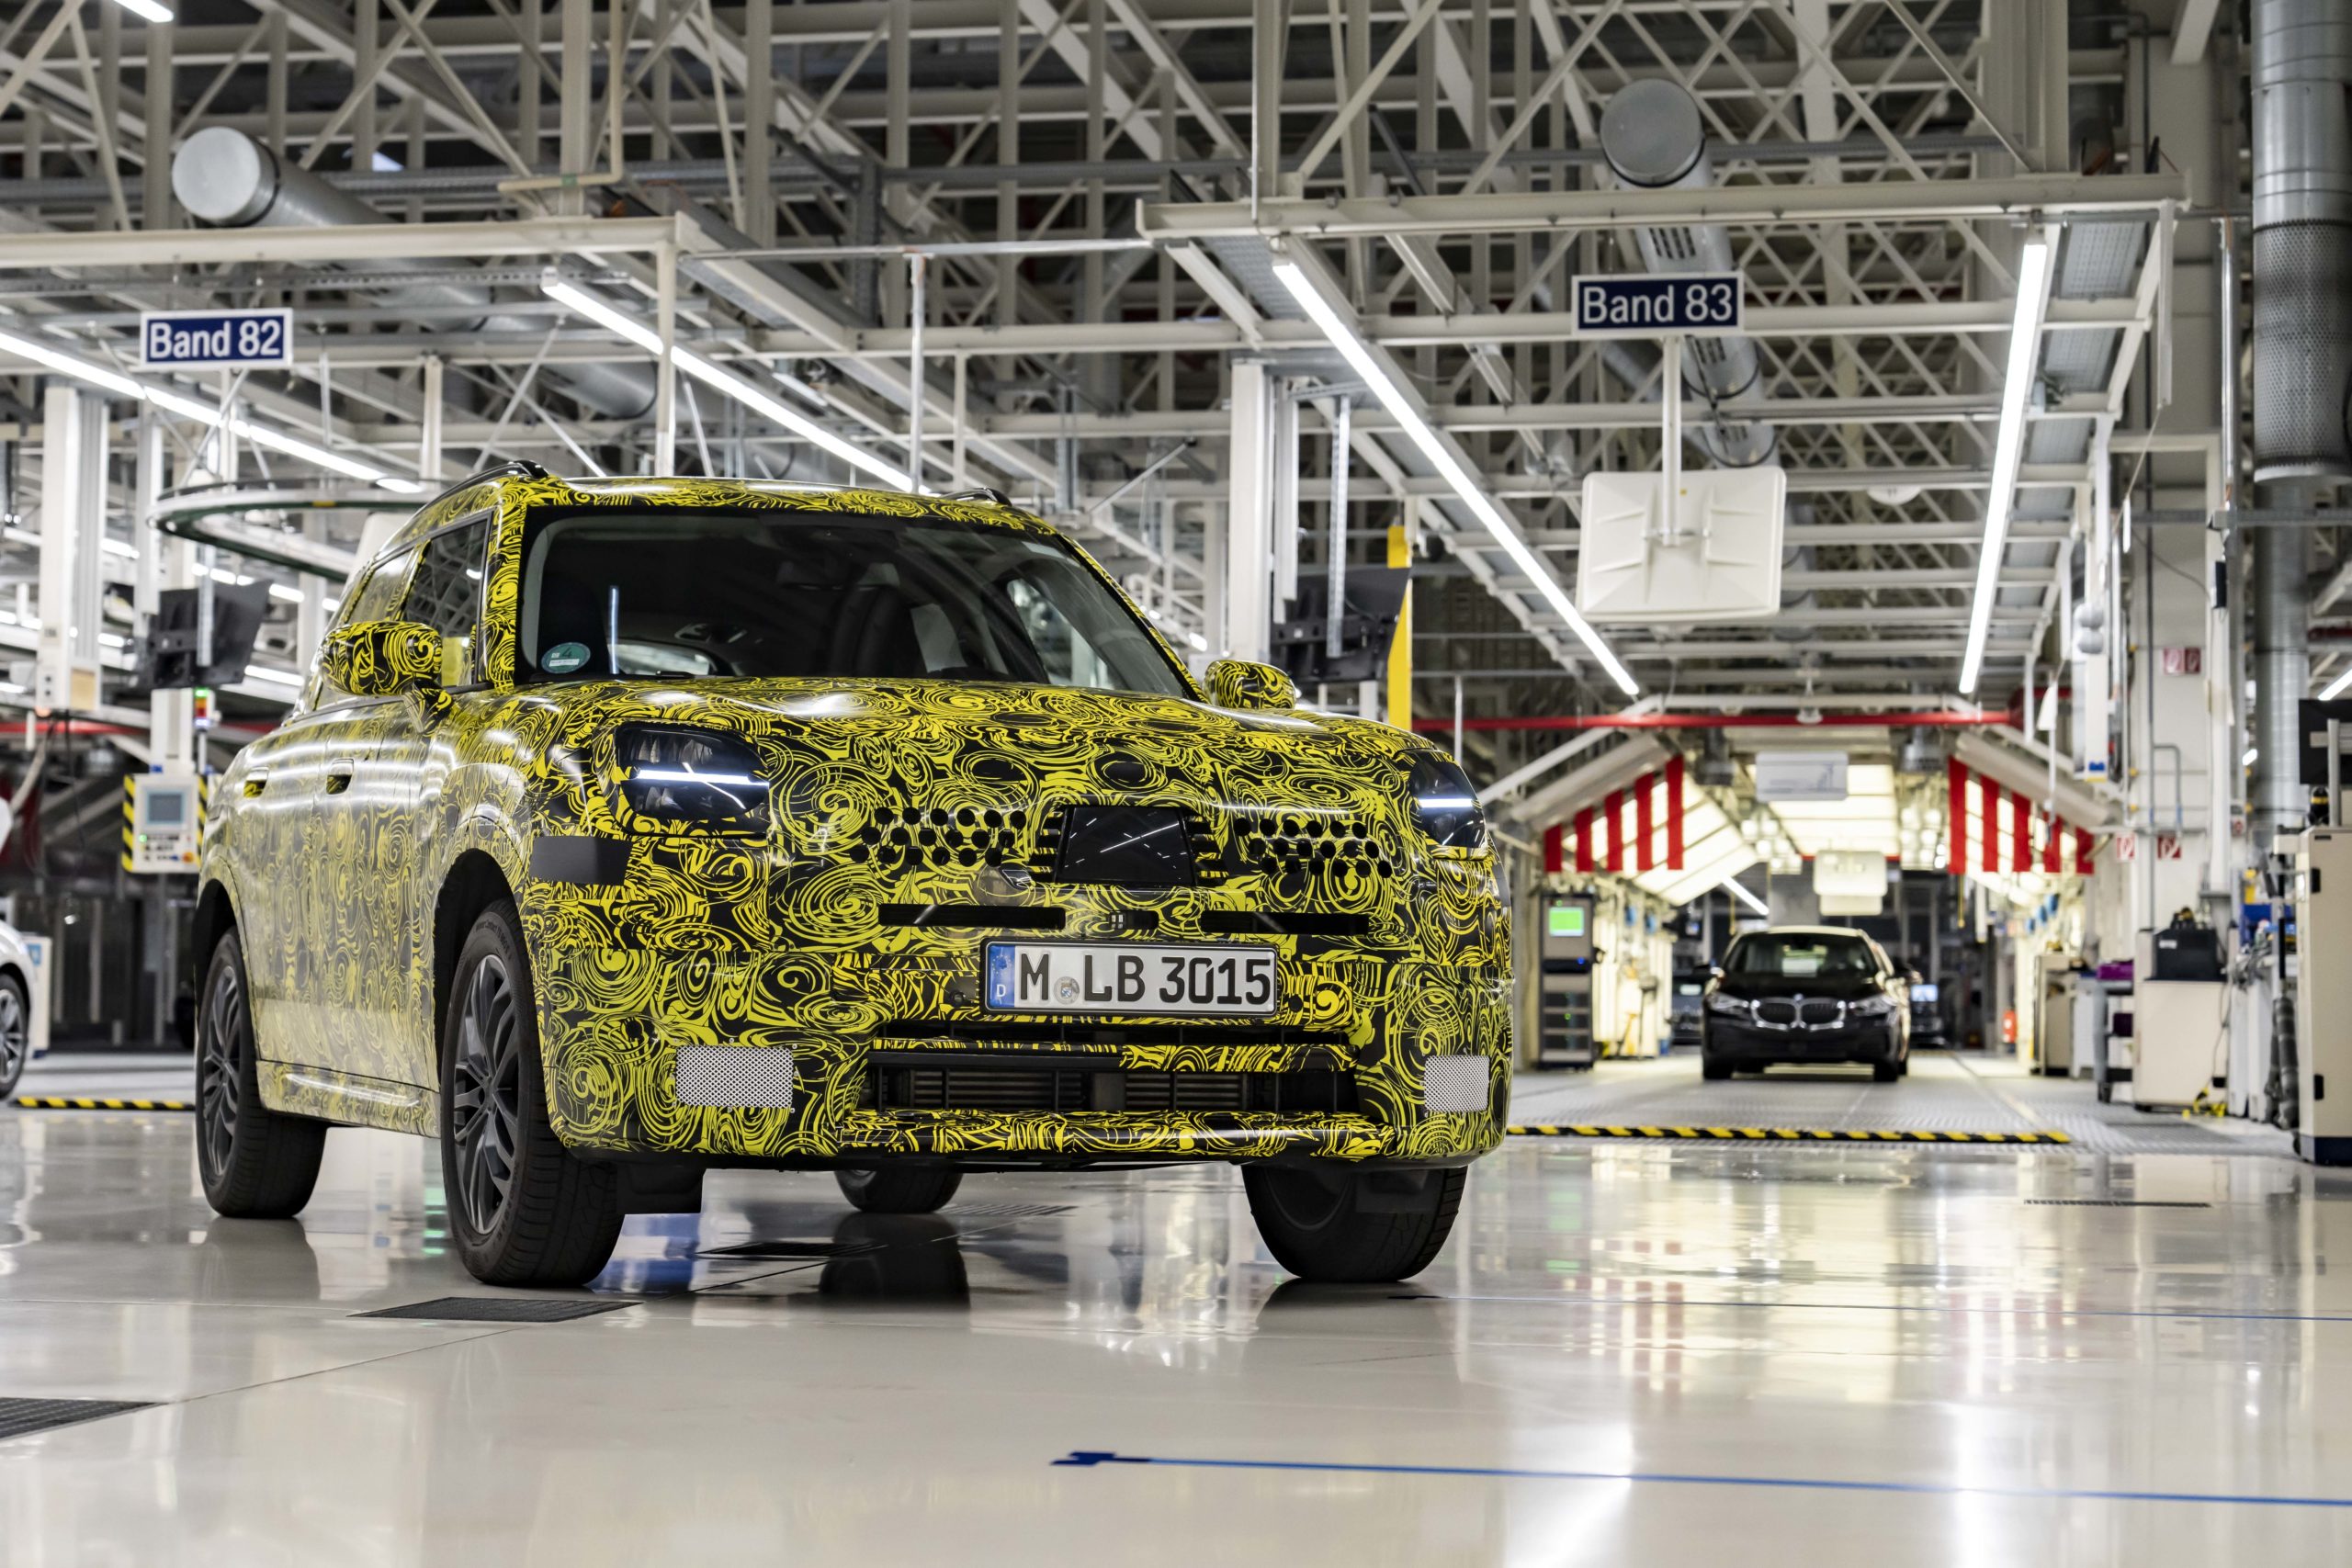 electric mini production could continue in oxford after £500m investment and £75m taxpayer contribution